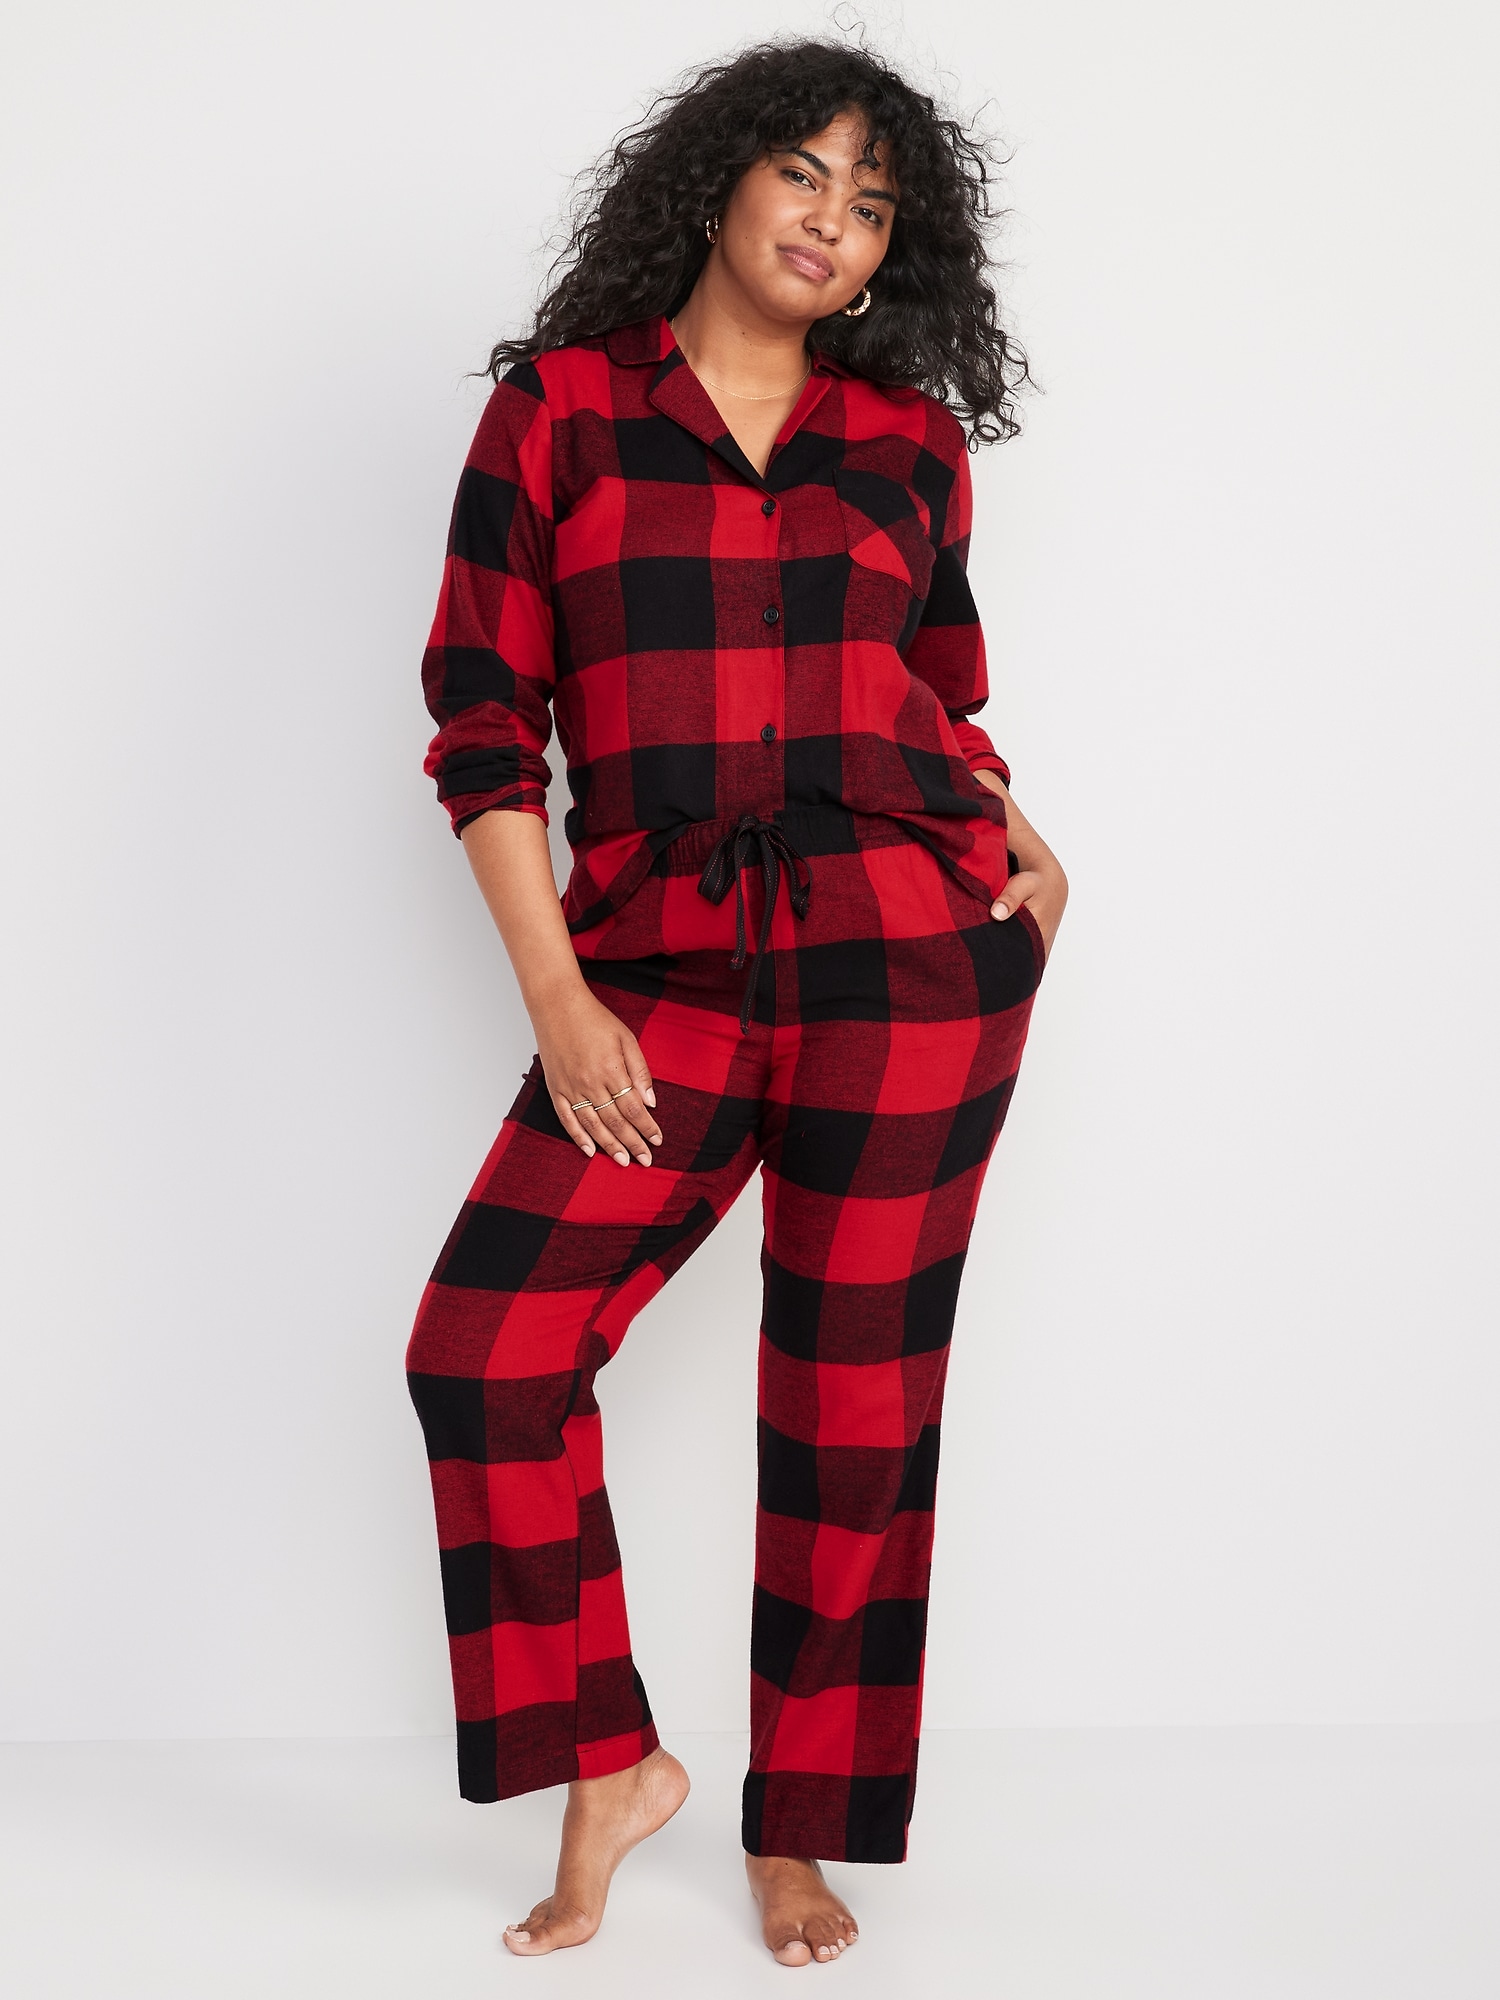 NWT Old Navy Patterned Flannel Sleep Pants Pajamas Red Buffalo Plaid Women  Small